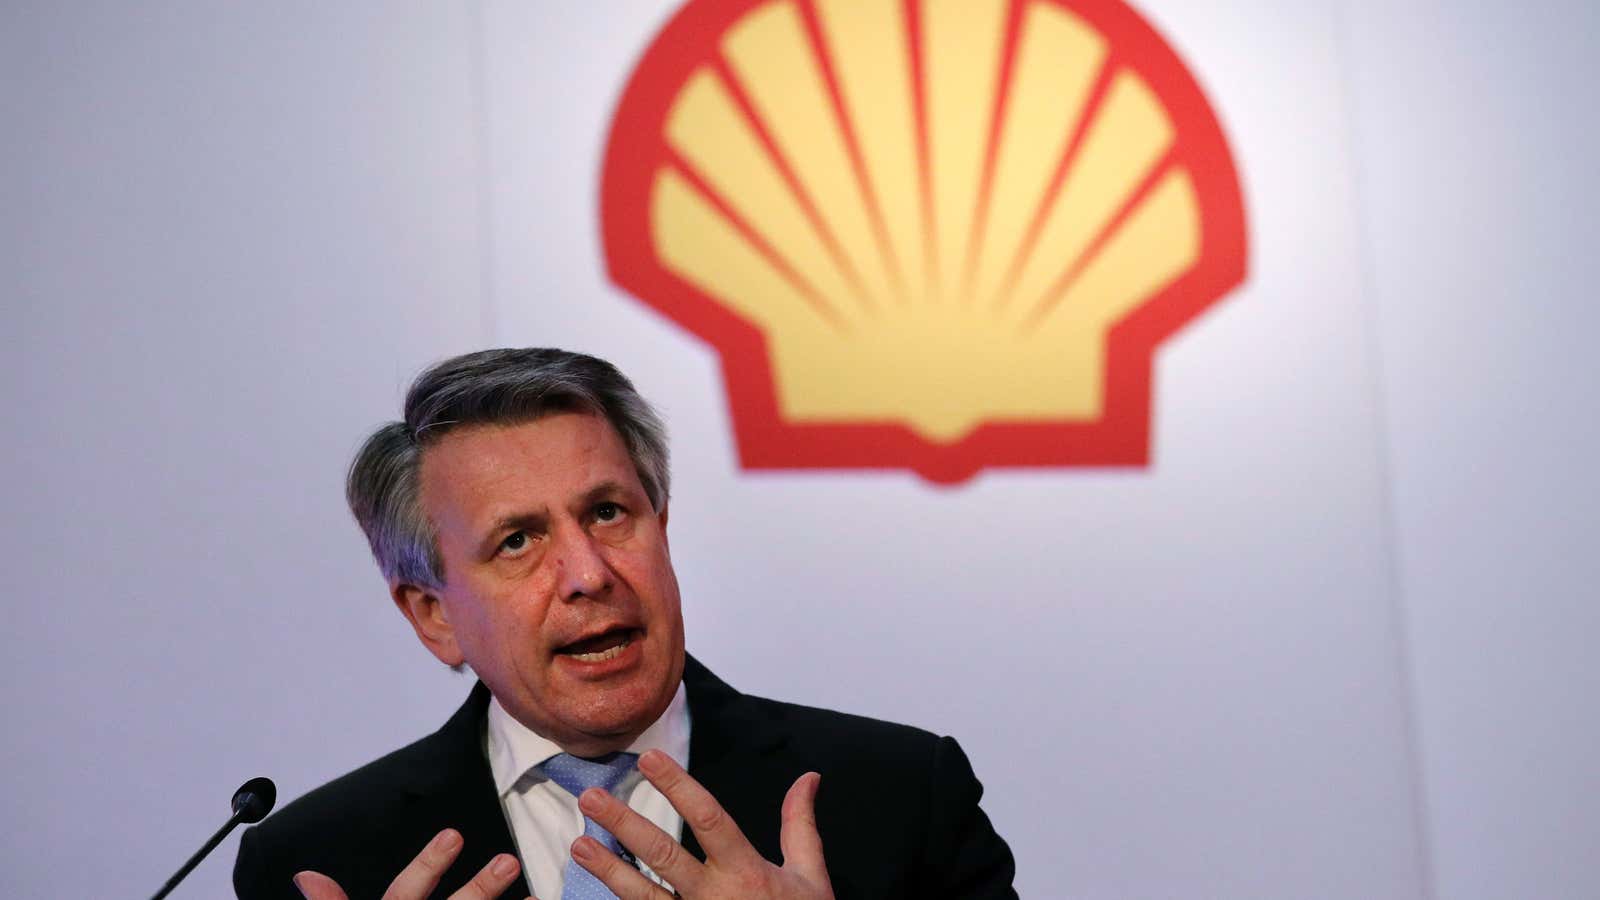 Oil boss makes a plea to tax energy companies, but leave prices alone